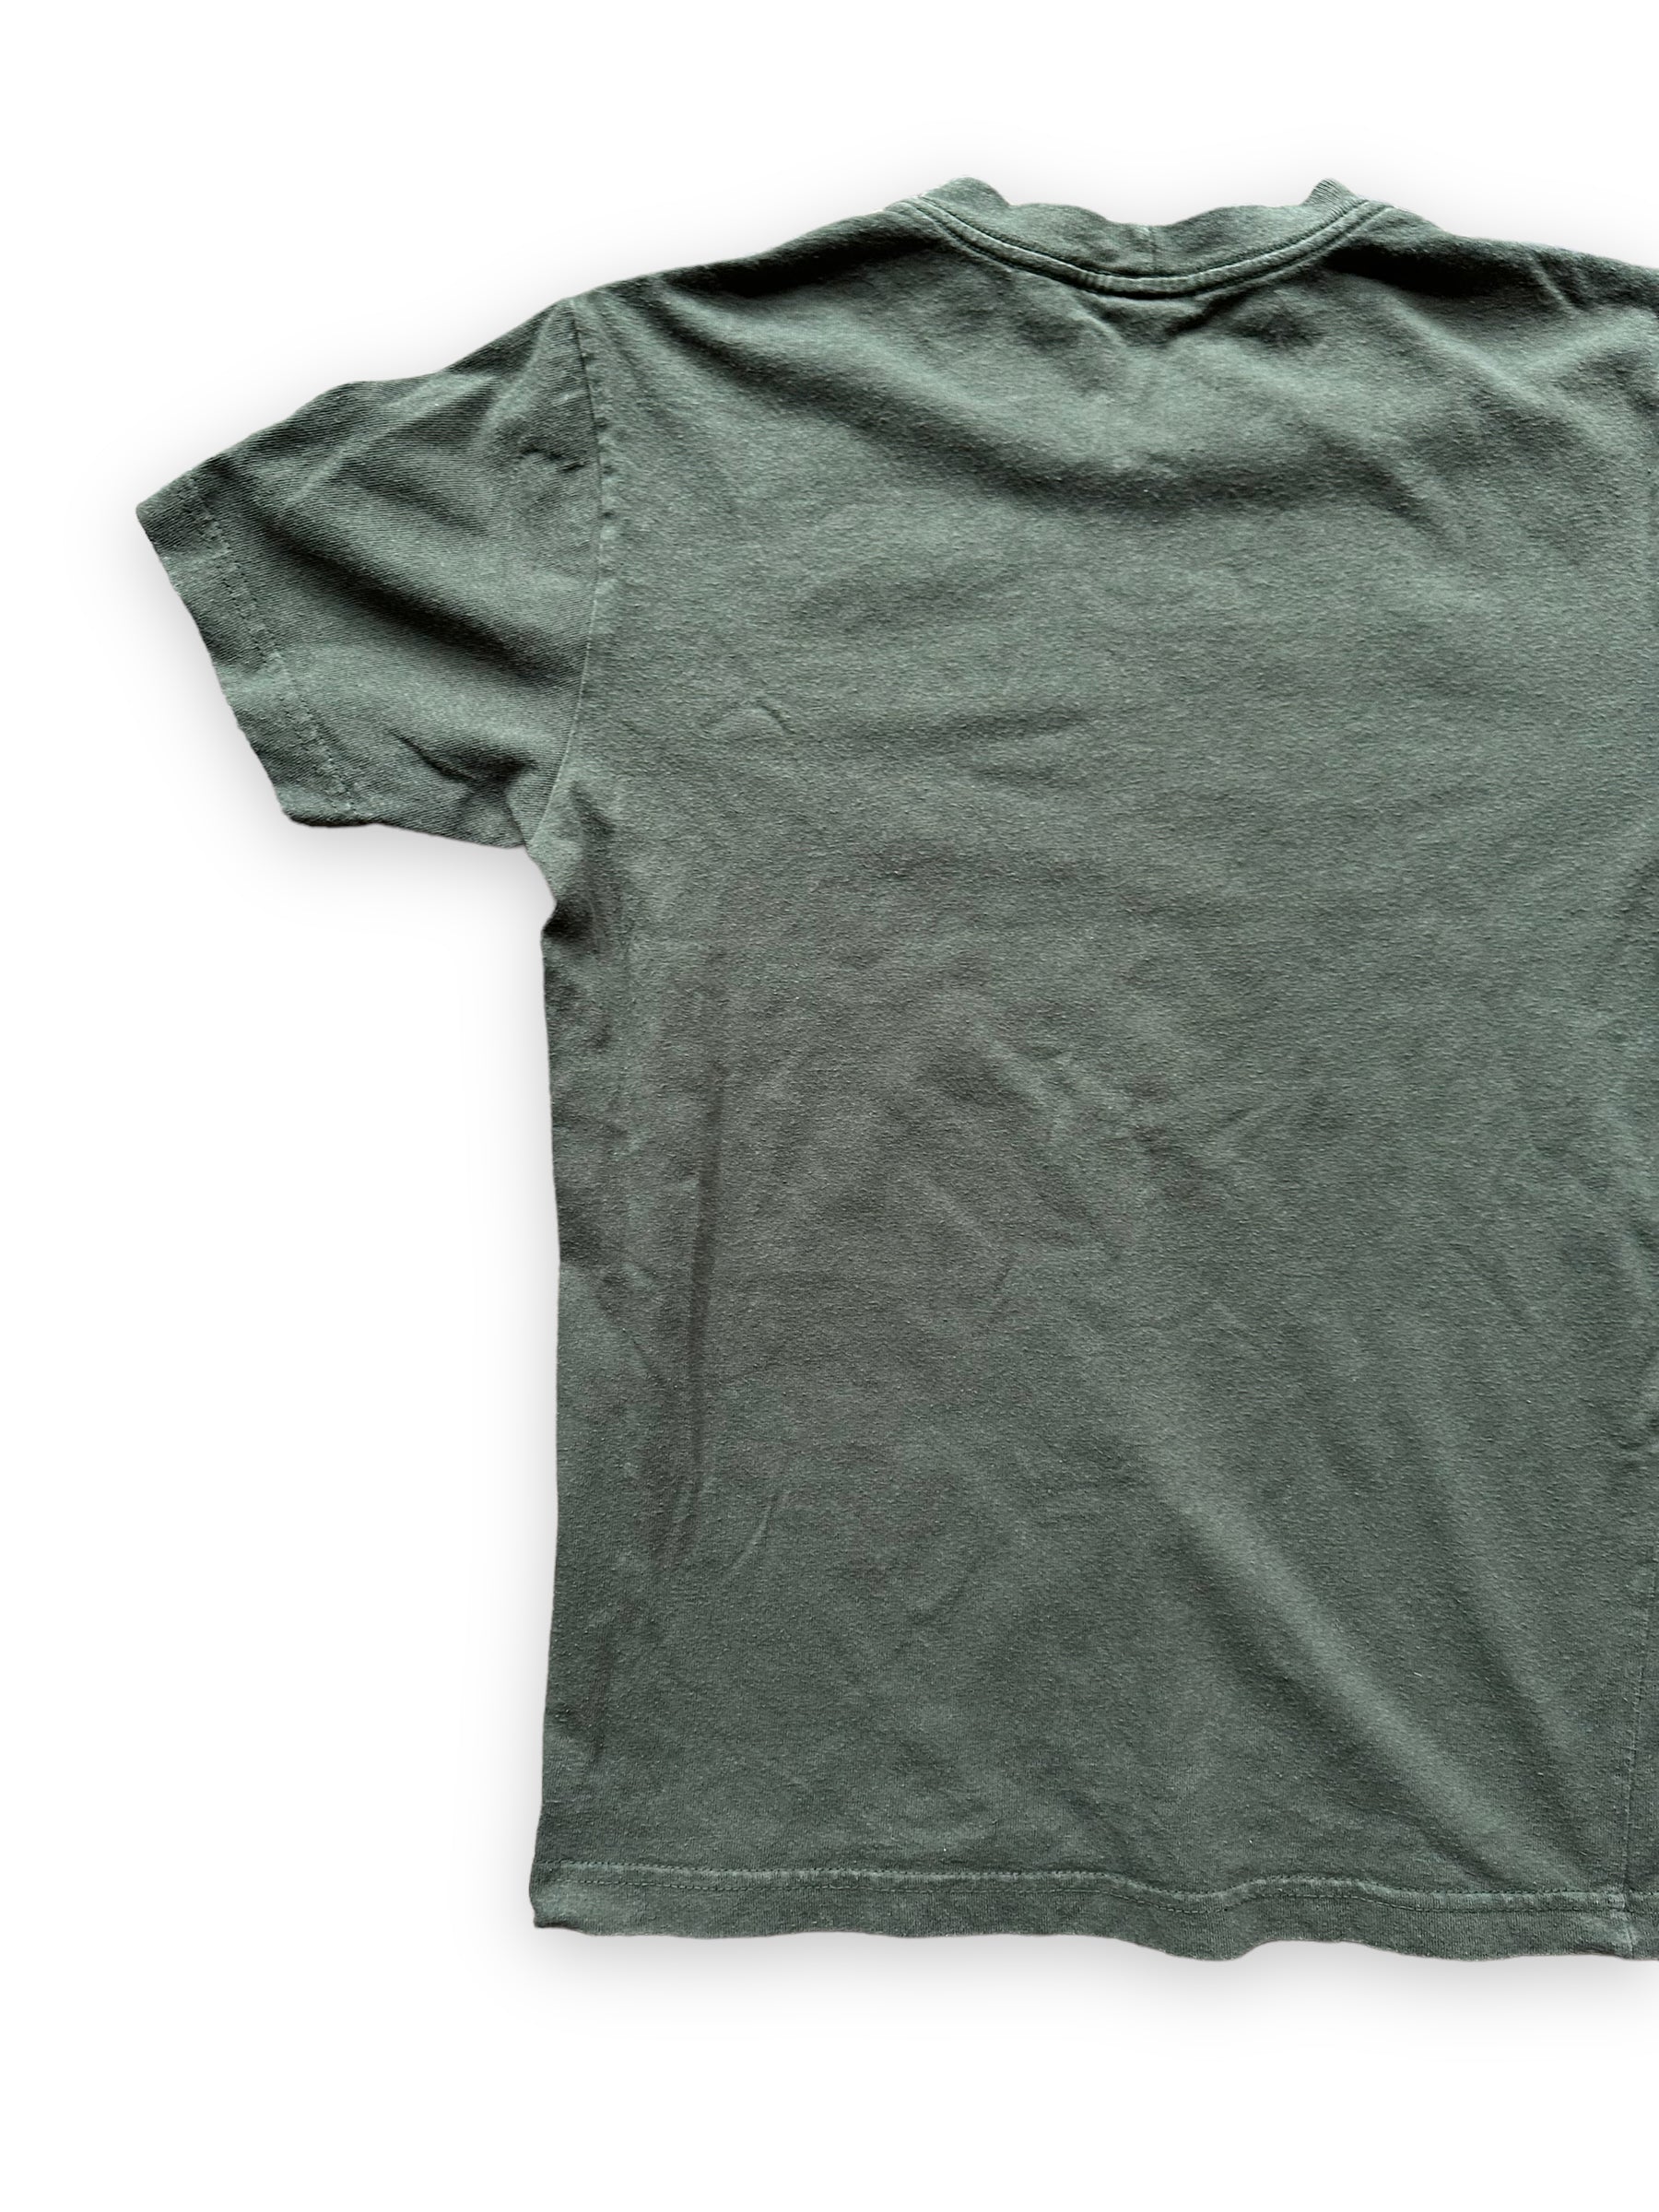 Left Rear View of Olive Green Filson Cotton Tee SZ XS  |  Barn Owl Vintage Goods | Filson Graphic Tees Seattle